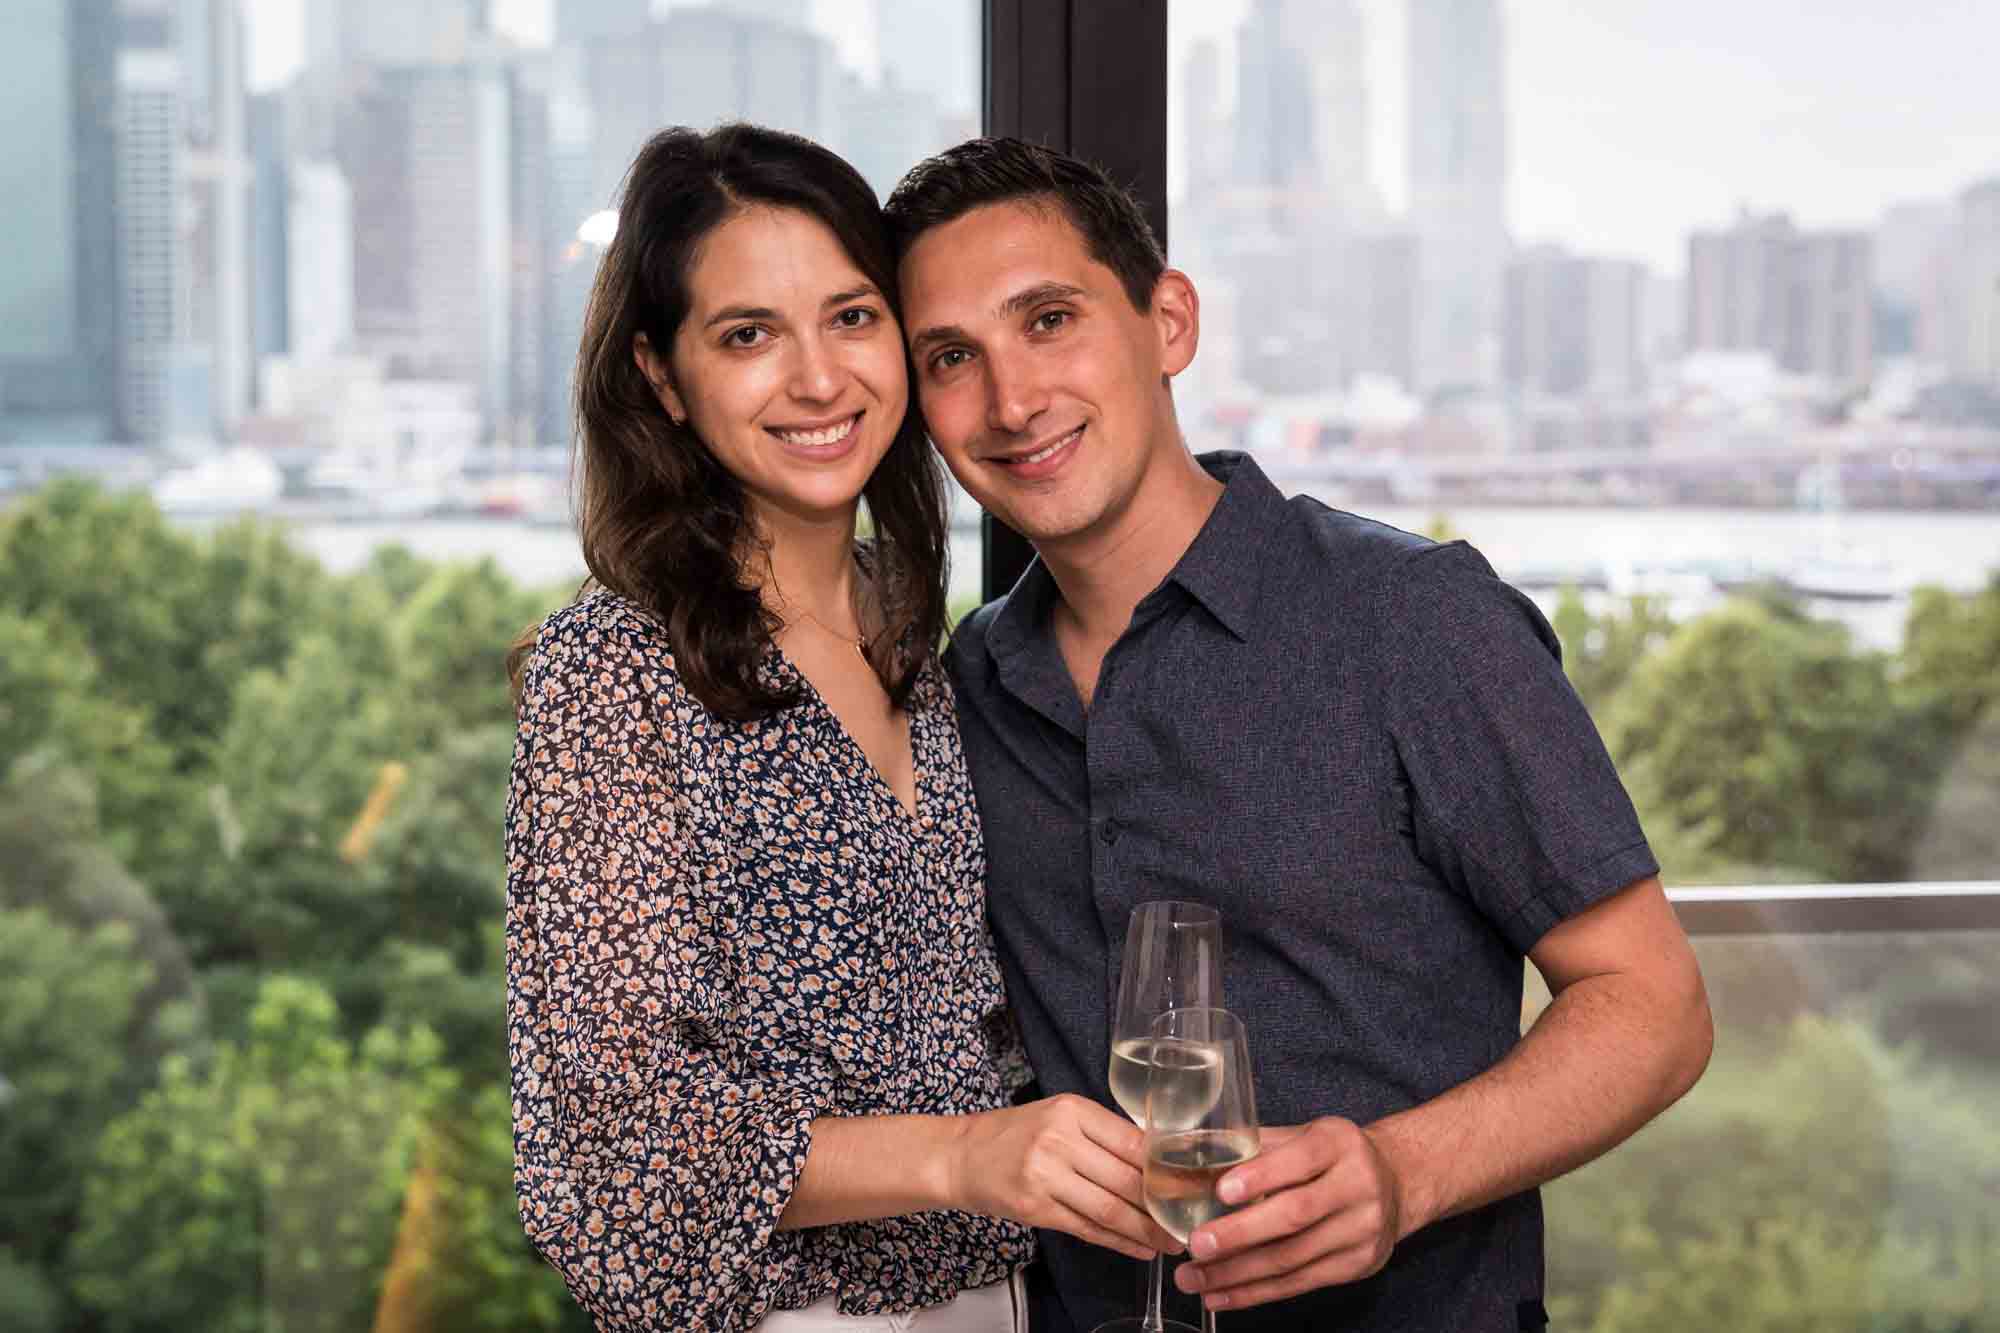 Couple standing together holding champagne glasses in front of window with NYC skyline in background